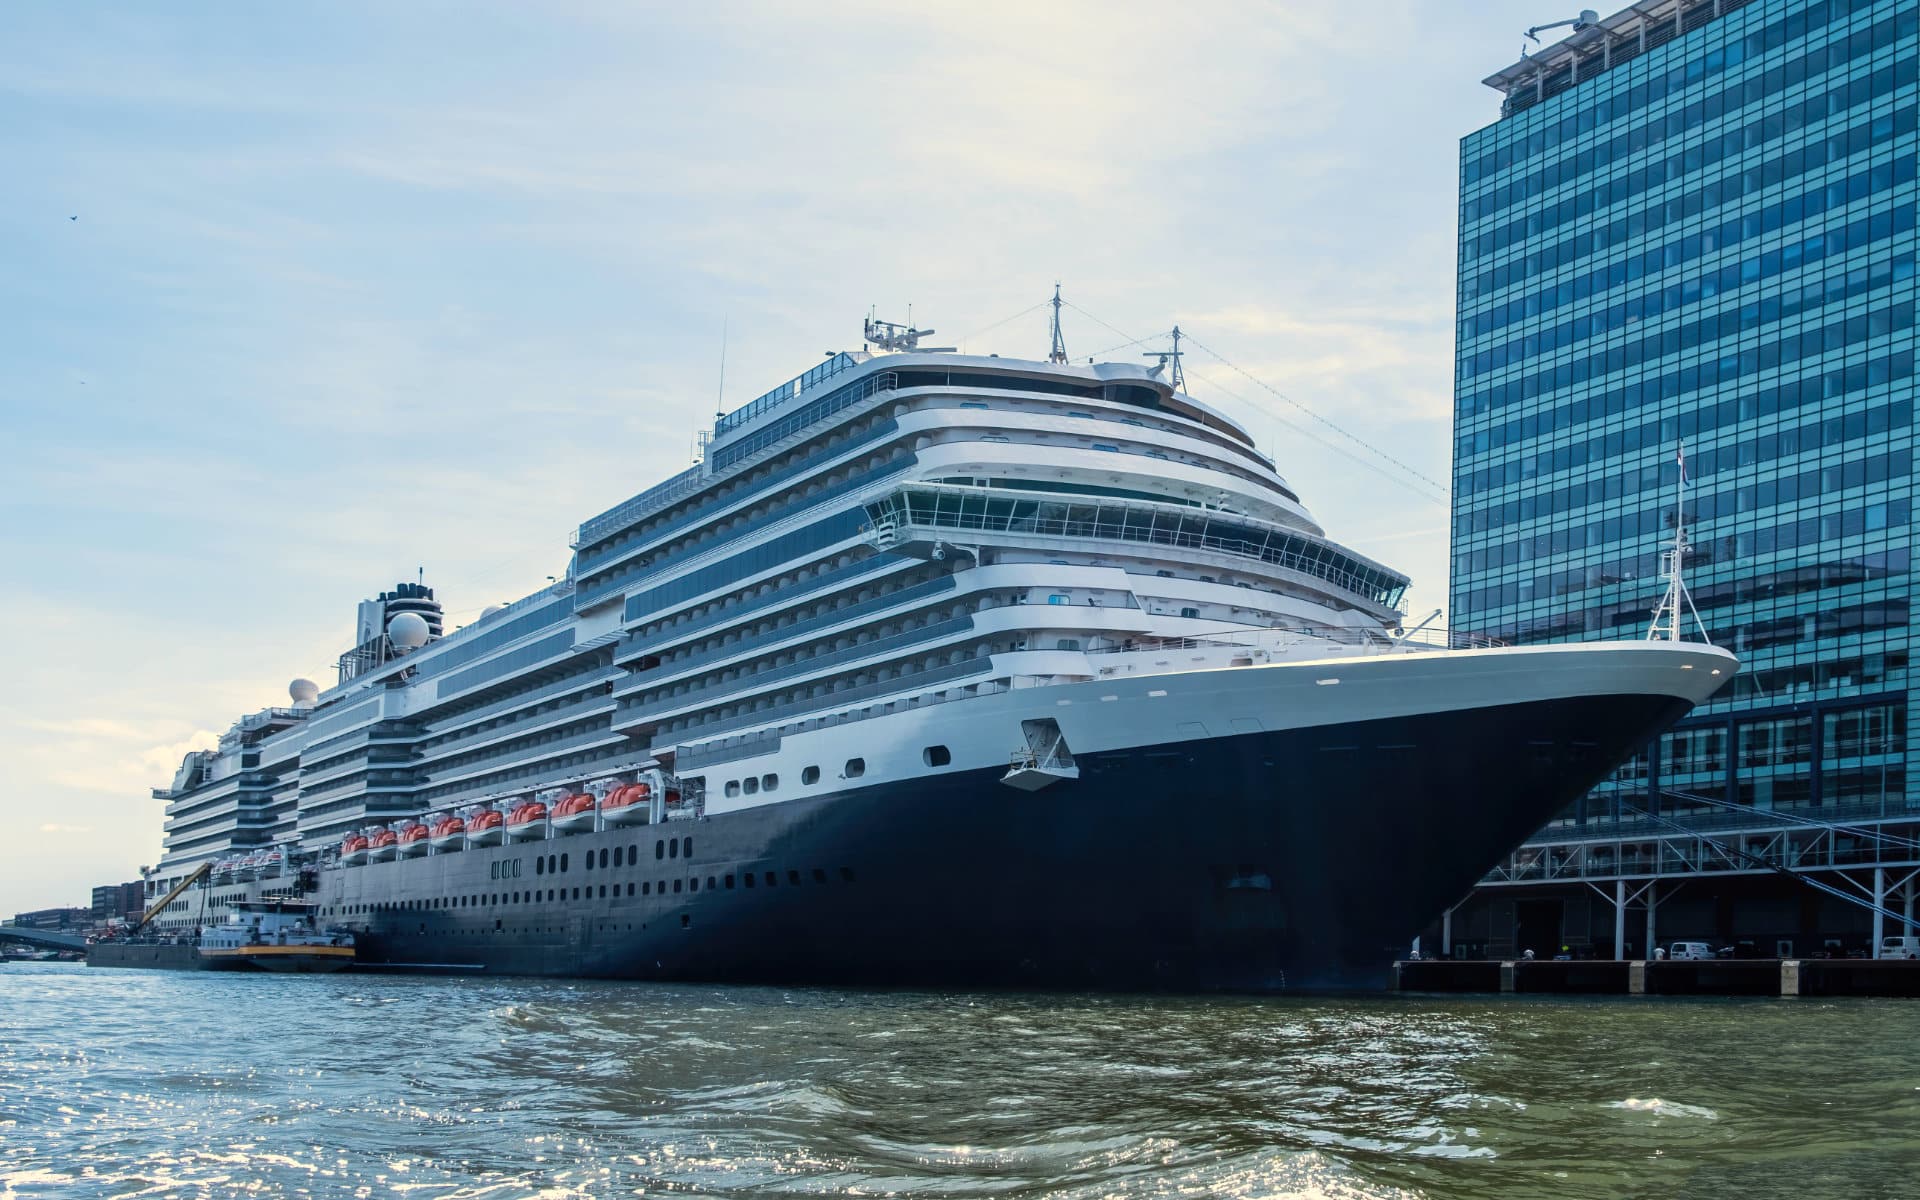 Amsterdam will ban large cruise ships like this one.